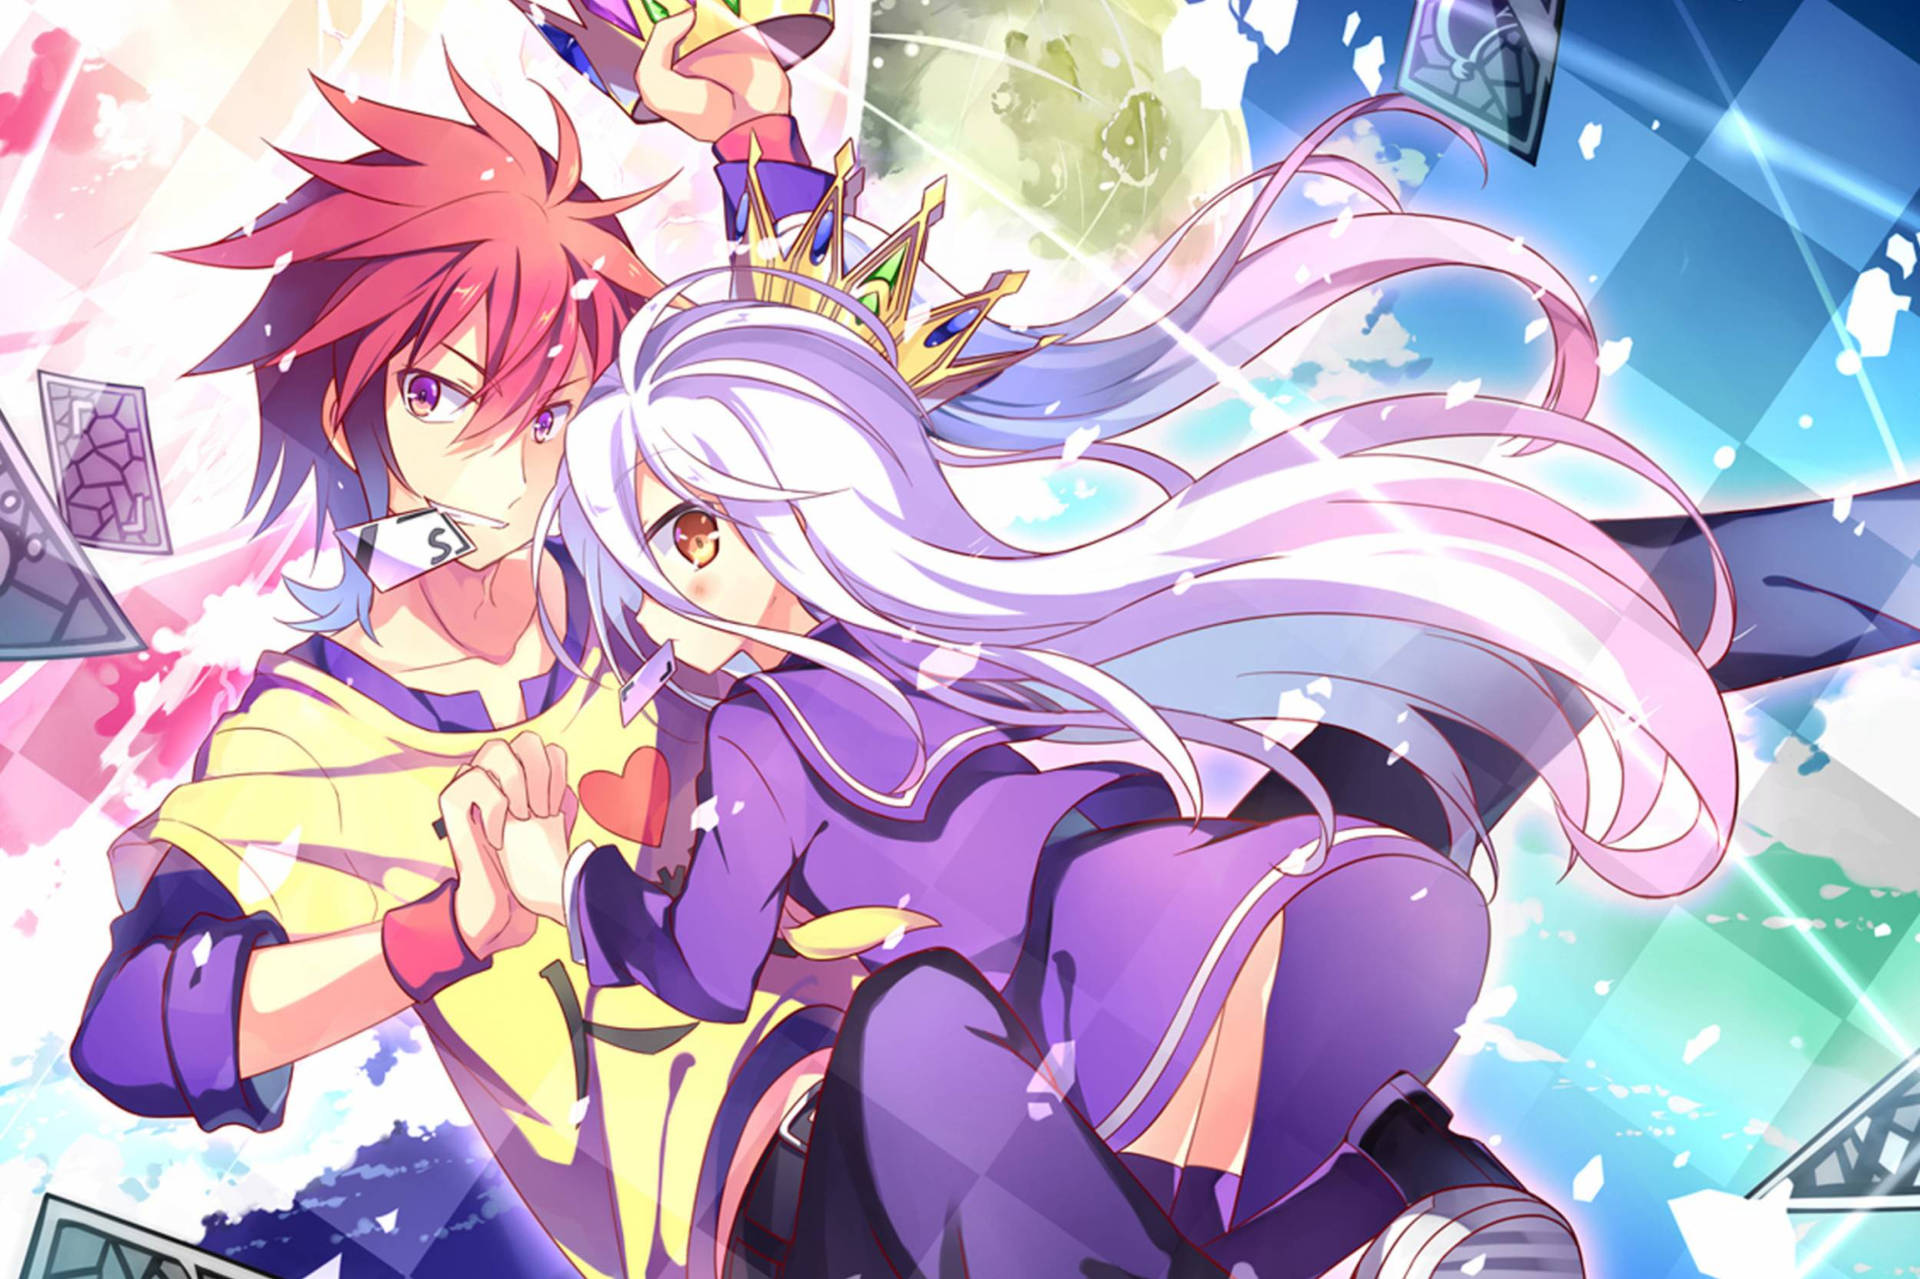 A reminder of the rules in No Game No Life Wallpaper